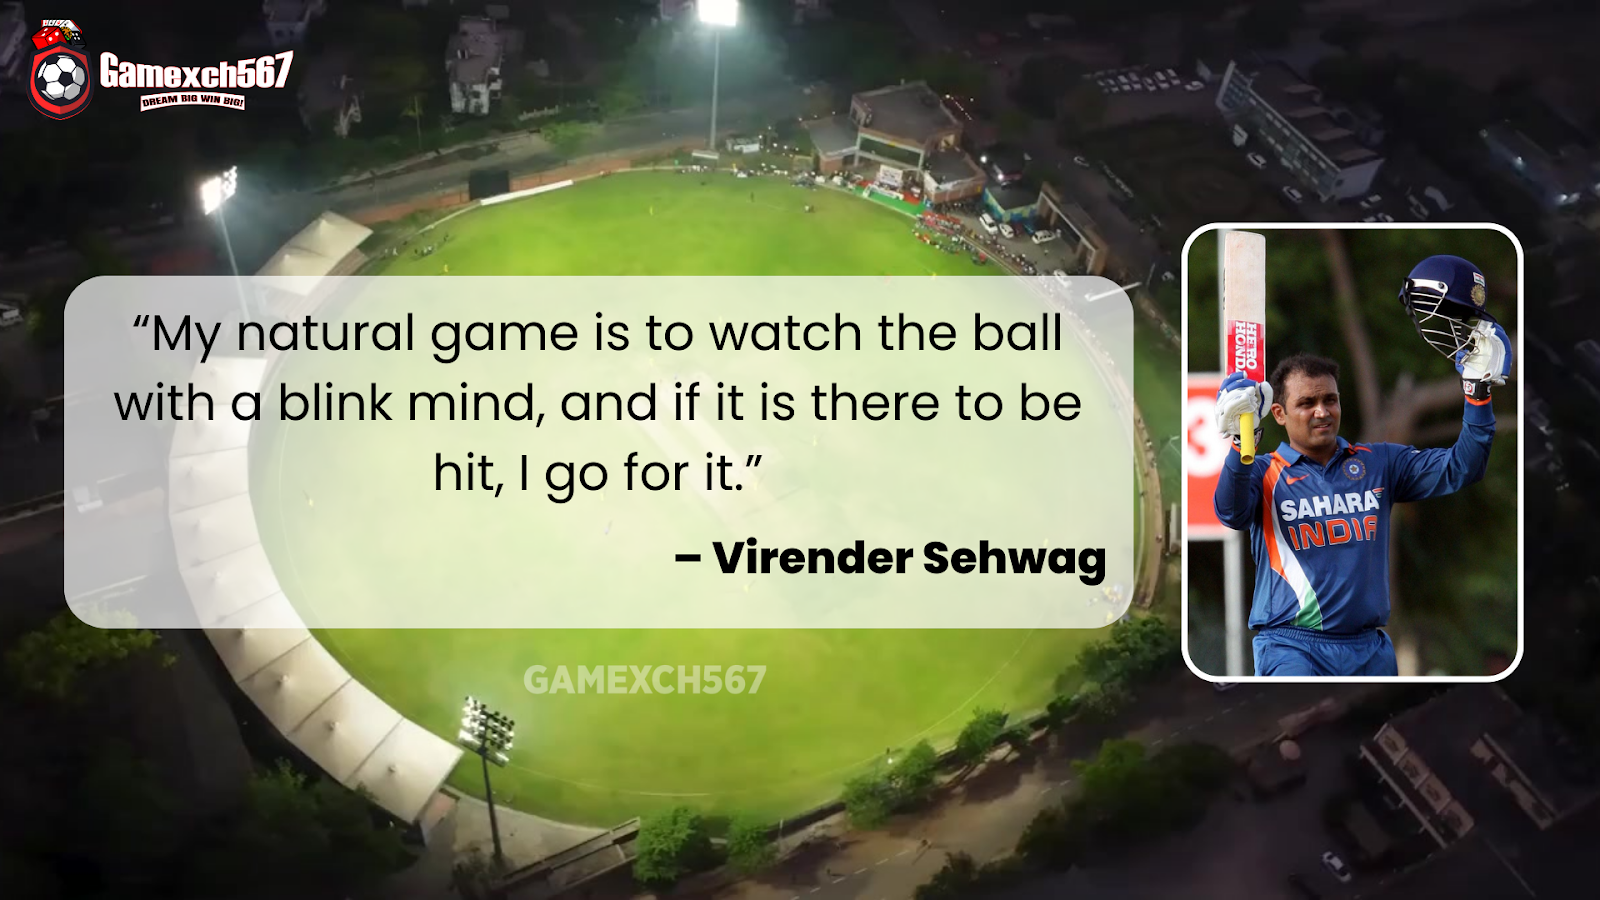 “My natural game is to watch the ball with a blink mind, and if it is there to be hit, I go for it.” – Virender Sehwag